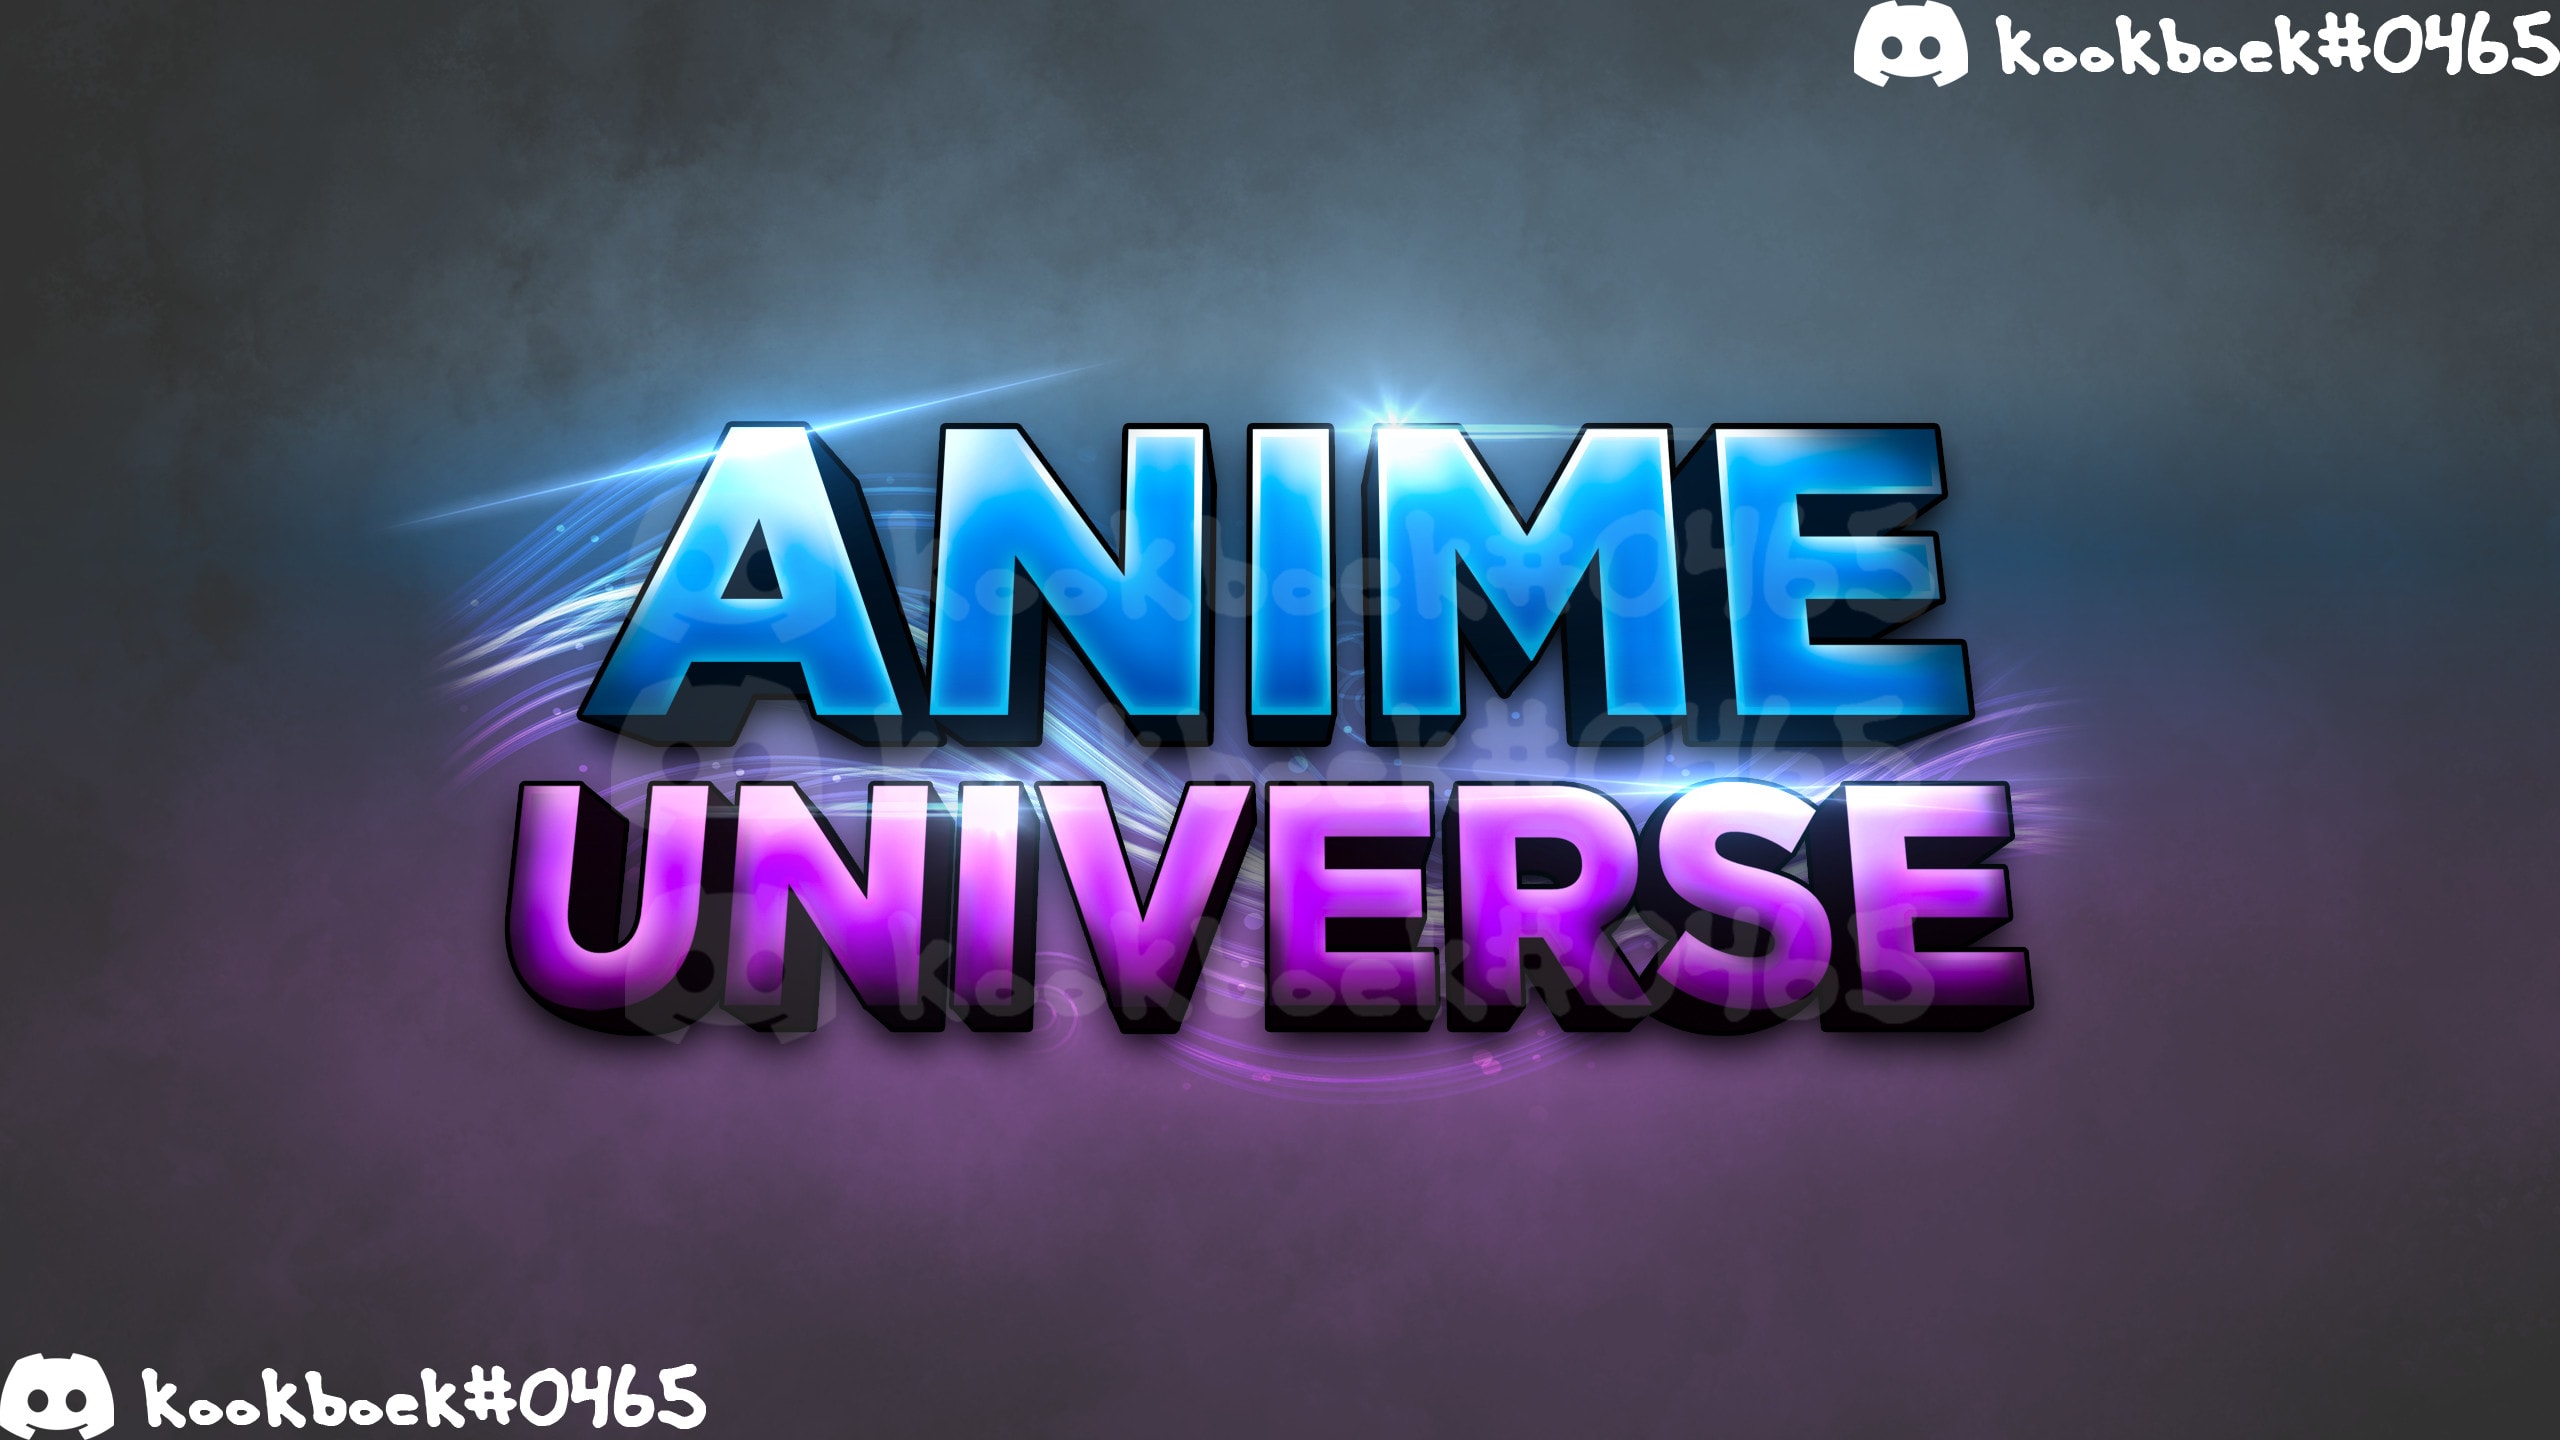 Discover more than 141 anime universe best - awesomeenglish.edu.vn